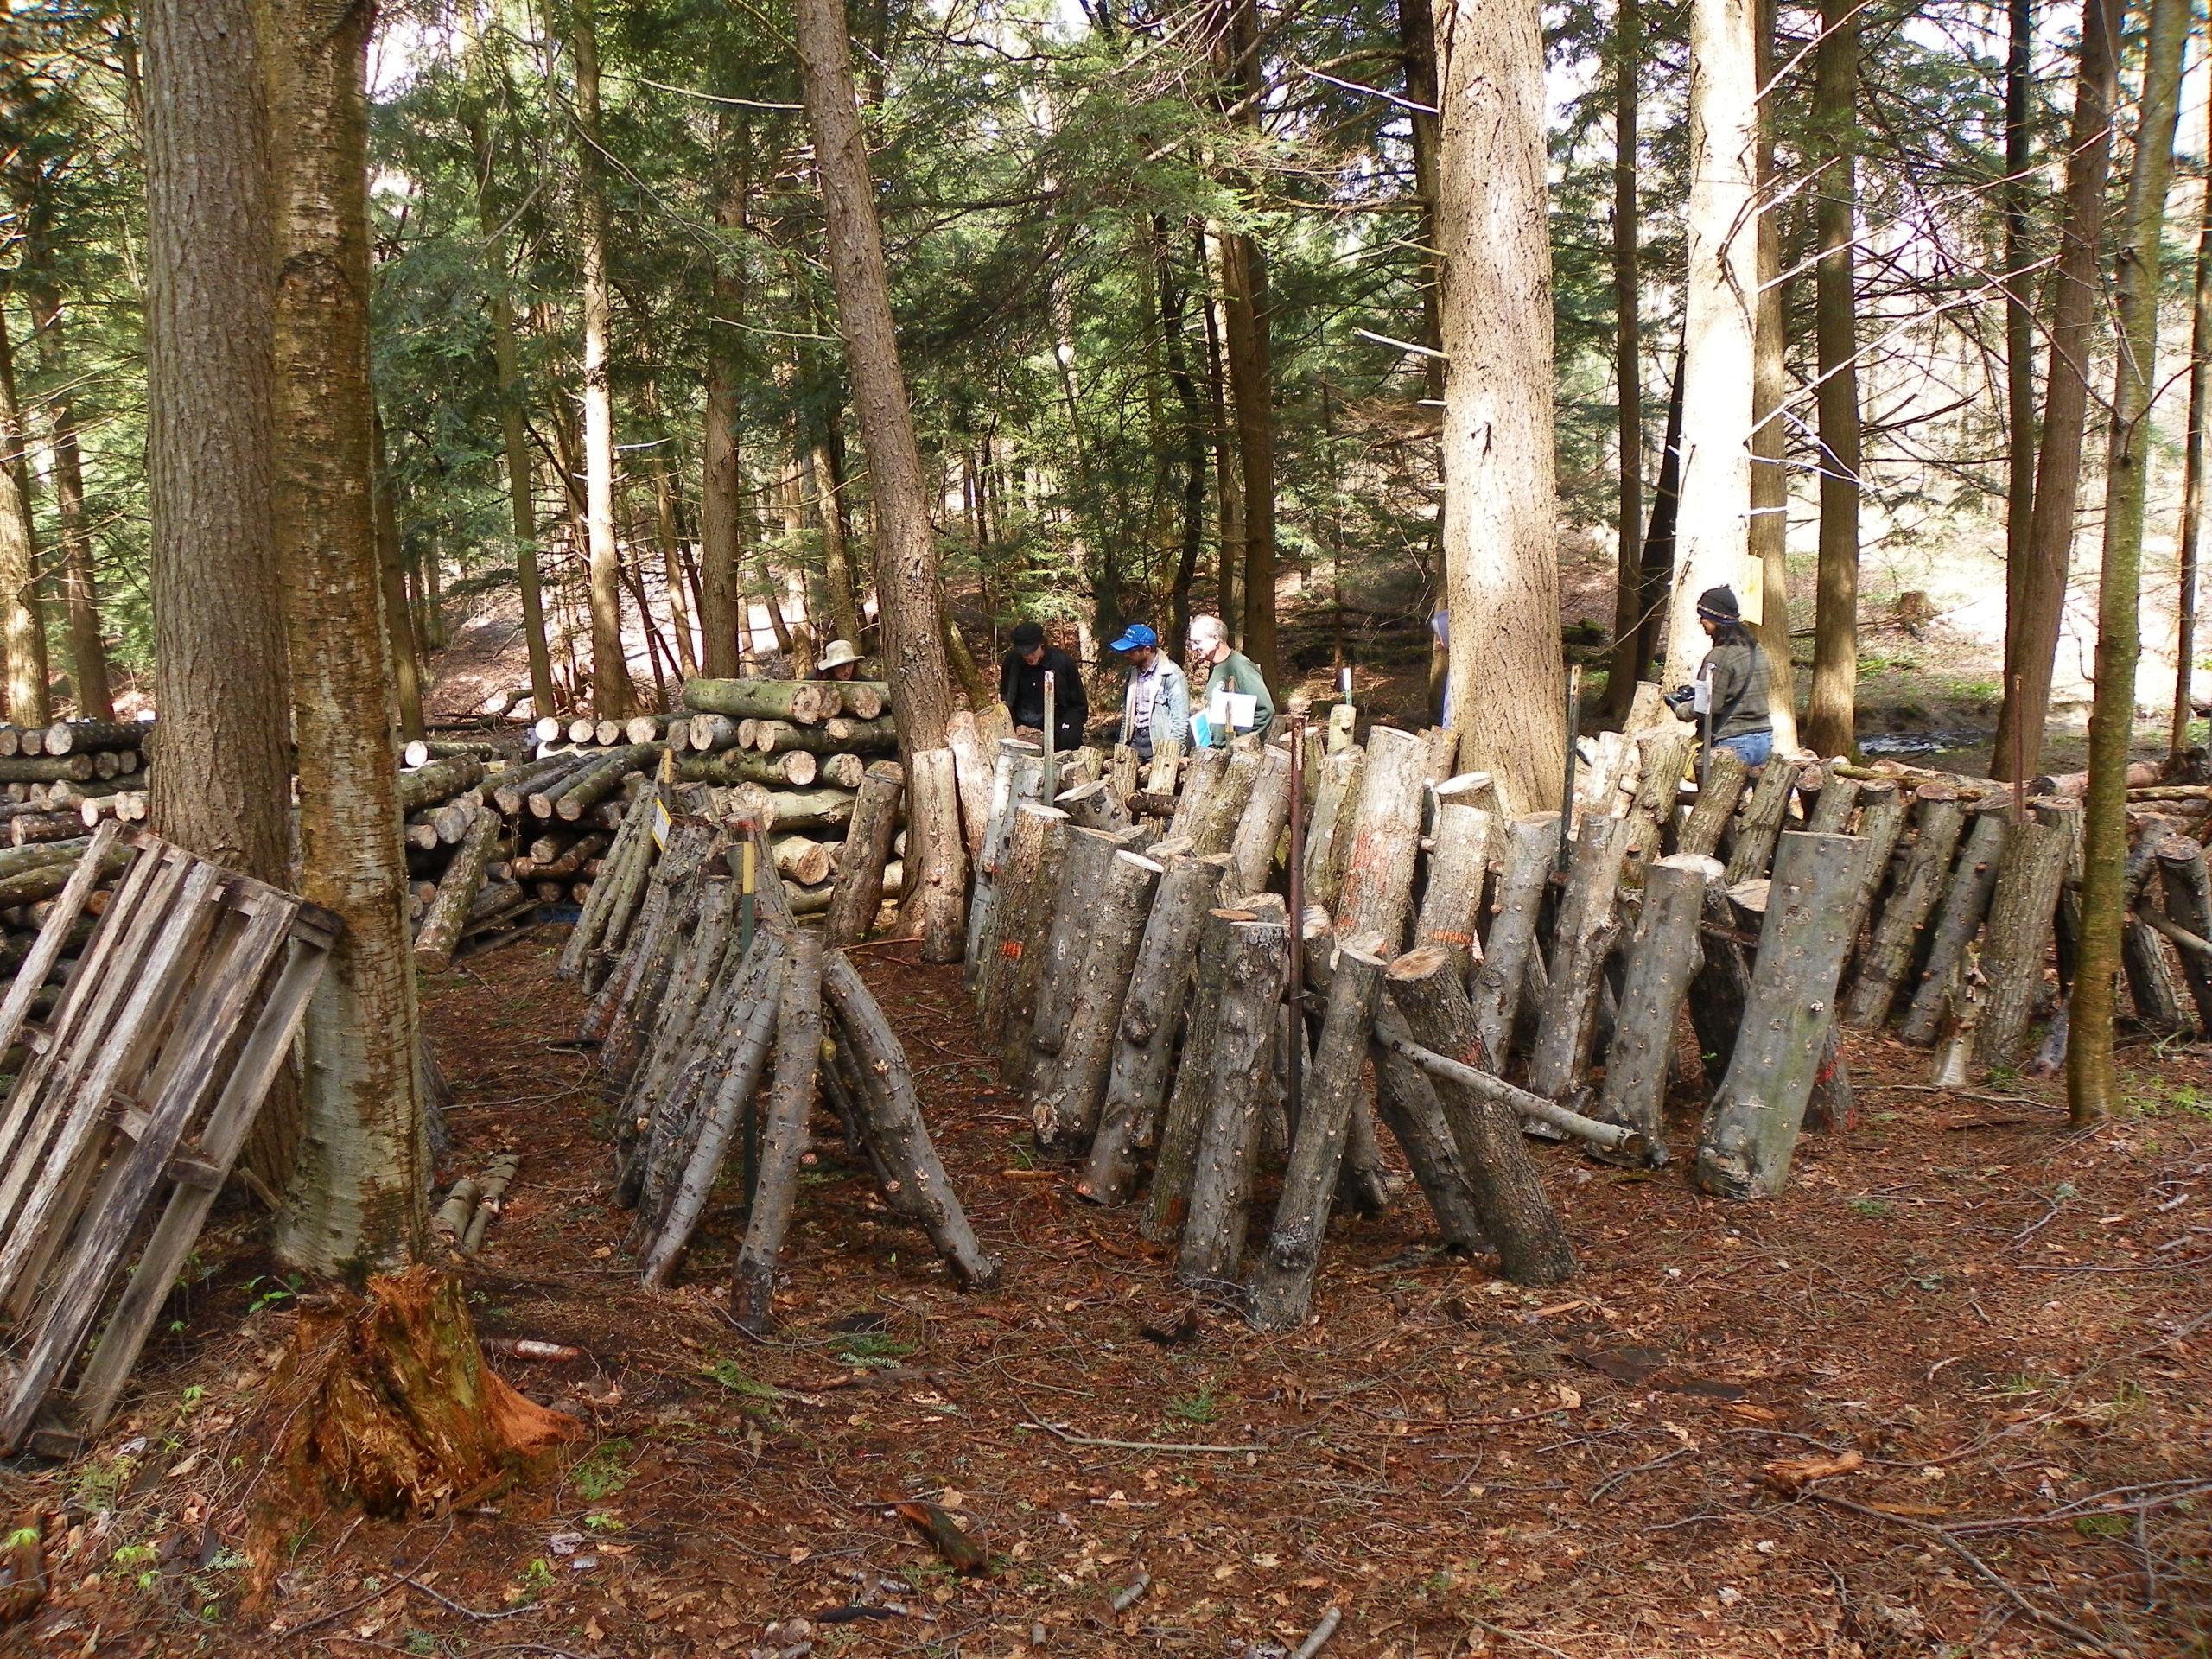 Shiitake logs are stacked against each other in rows in a forest.